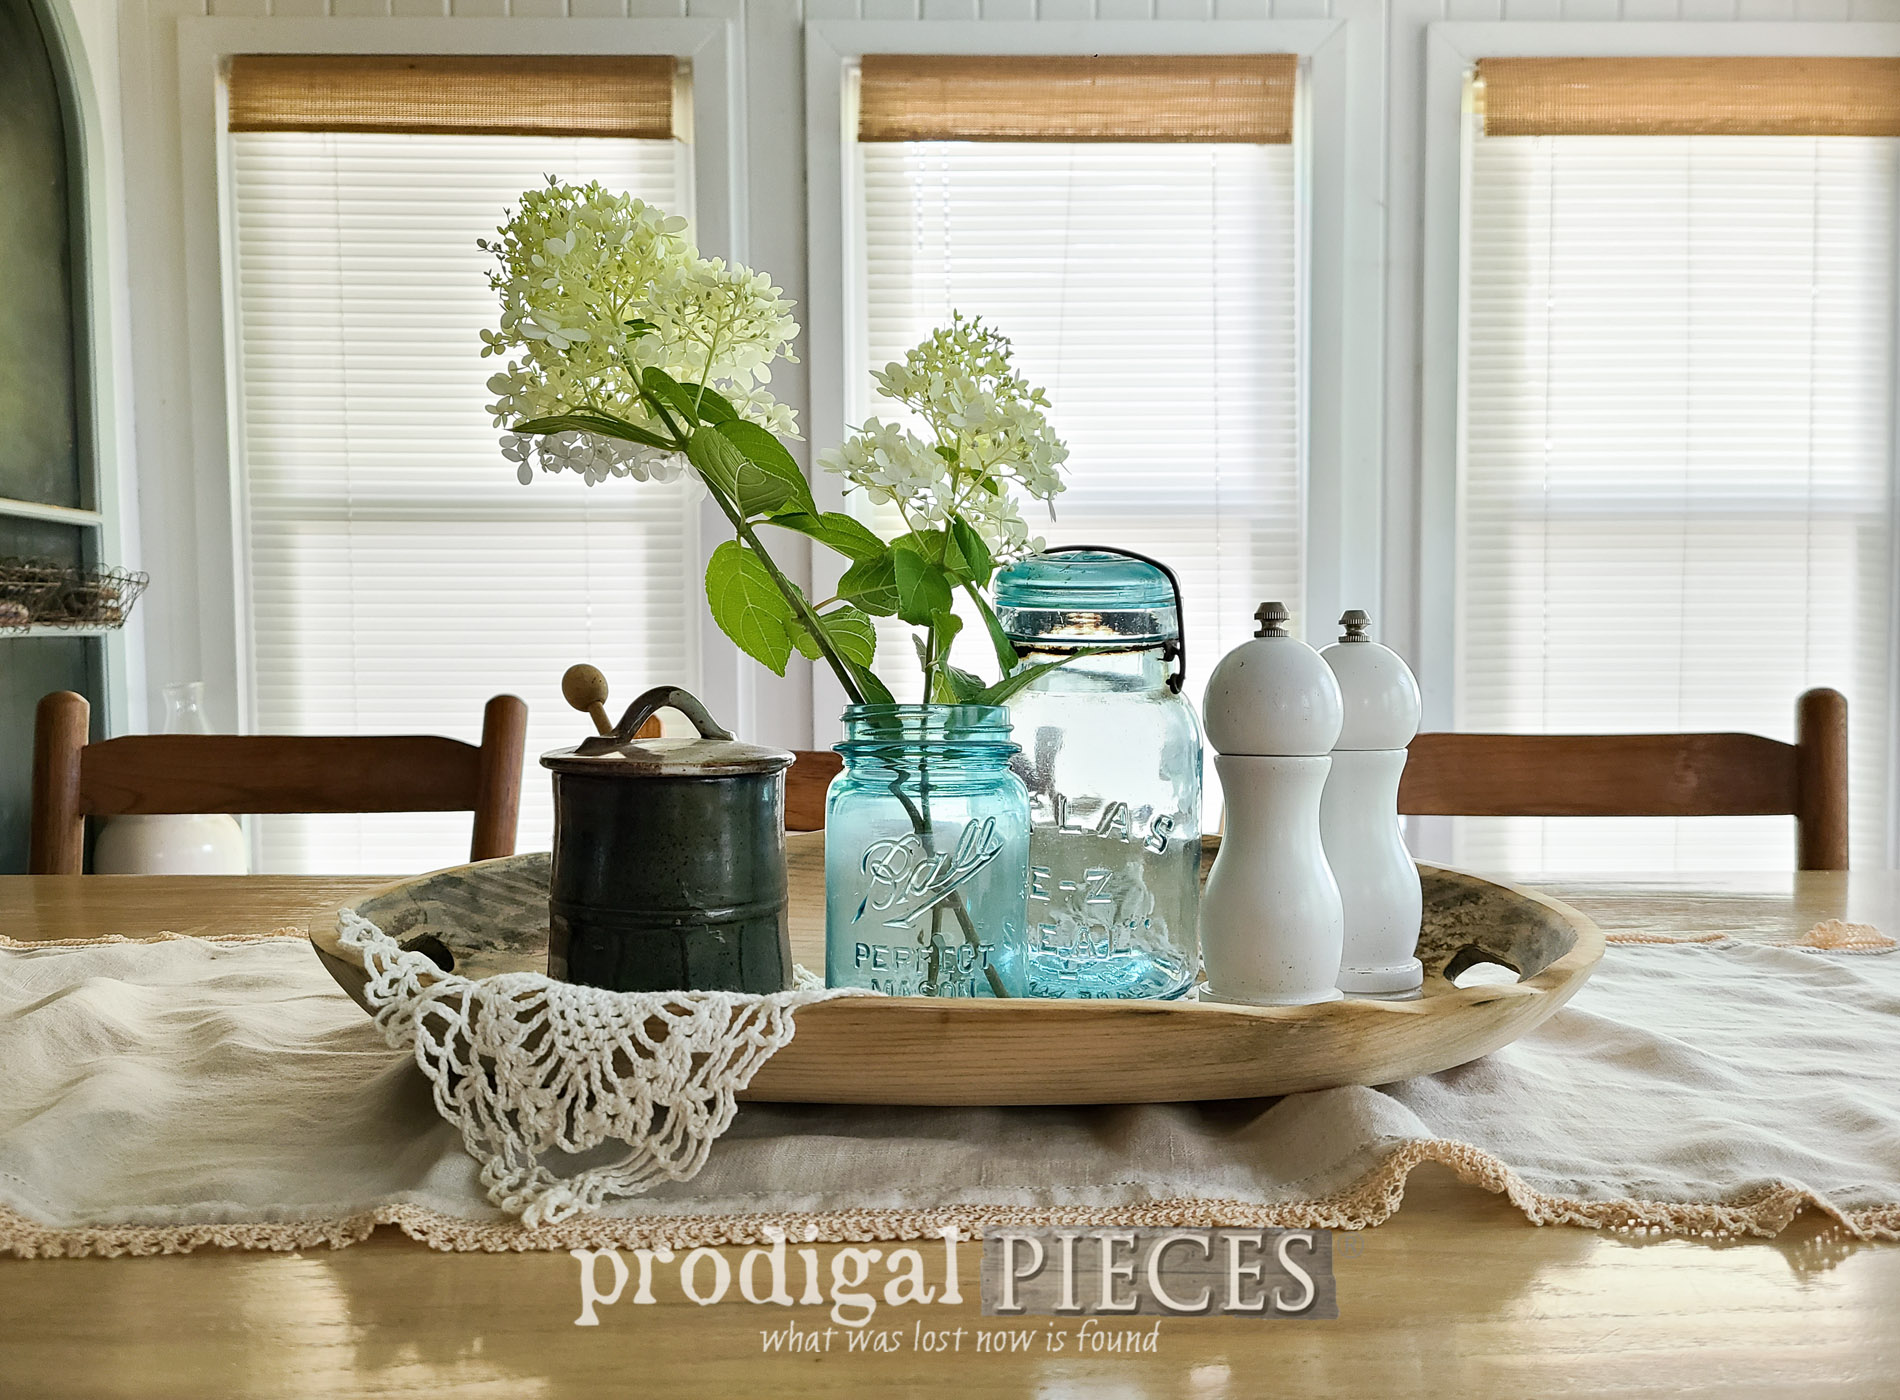 Featured Farmhouse Dough Bowl from Tourist Token by Larissa of Prodigal Pieces | prodigalpieces.com #prodigalpieces #farmhouse #diy #upcycled #home